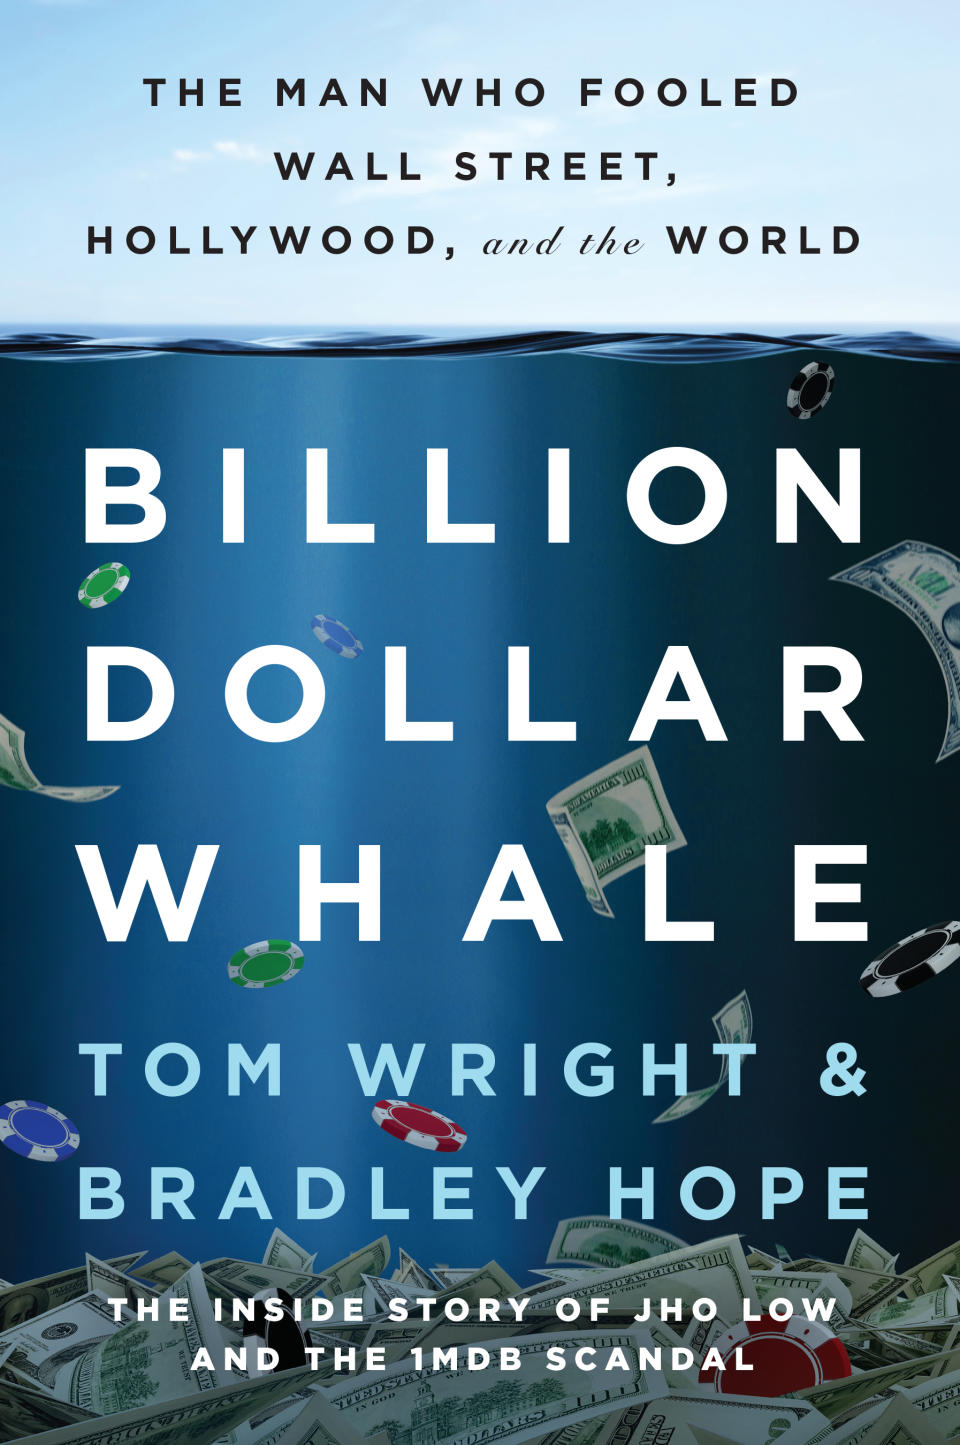 The cover of ‘Billion Dollar Whale’, a book on Malaysian financier Jho Low and the 1MDB scandal, by Wall Street Journal reporters Tom Wright and Bradley Hope.